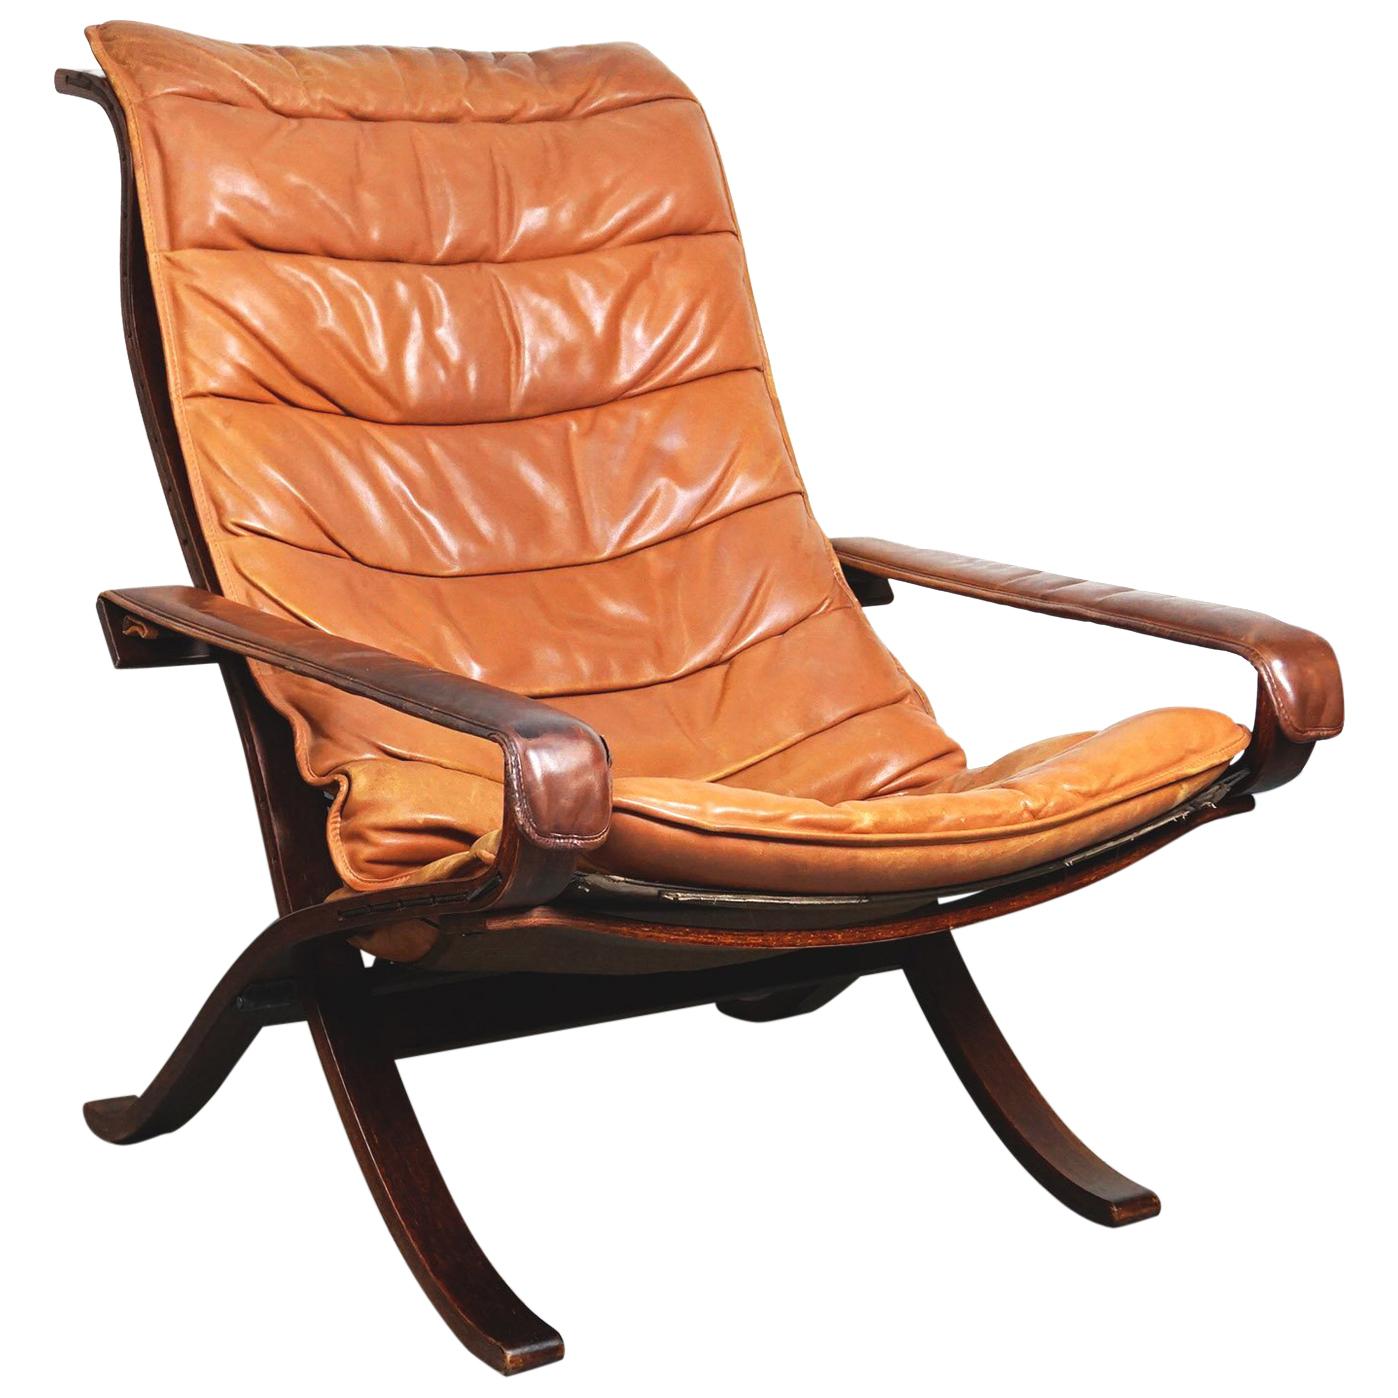 Siesta Lounge Chair with Cognac Brown Leather by Ingmar Relling for Westnofa